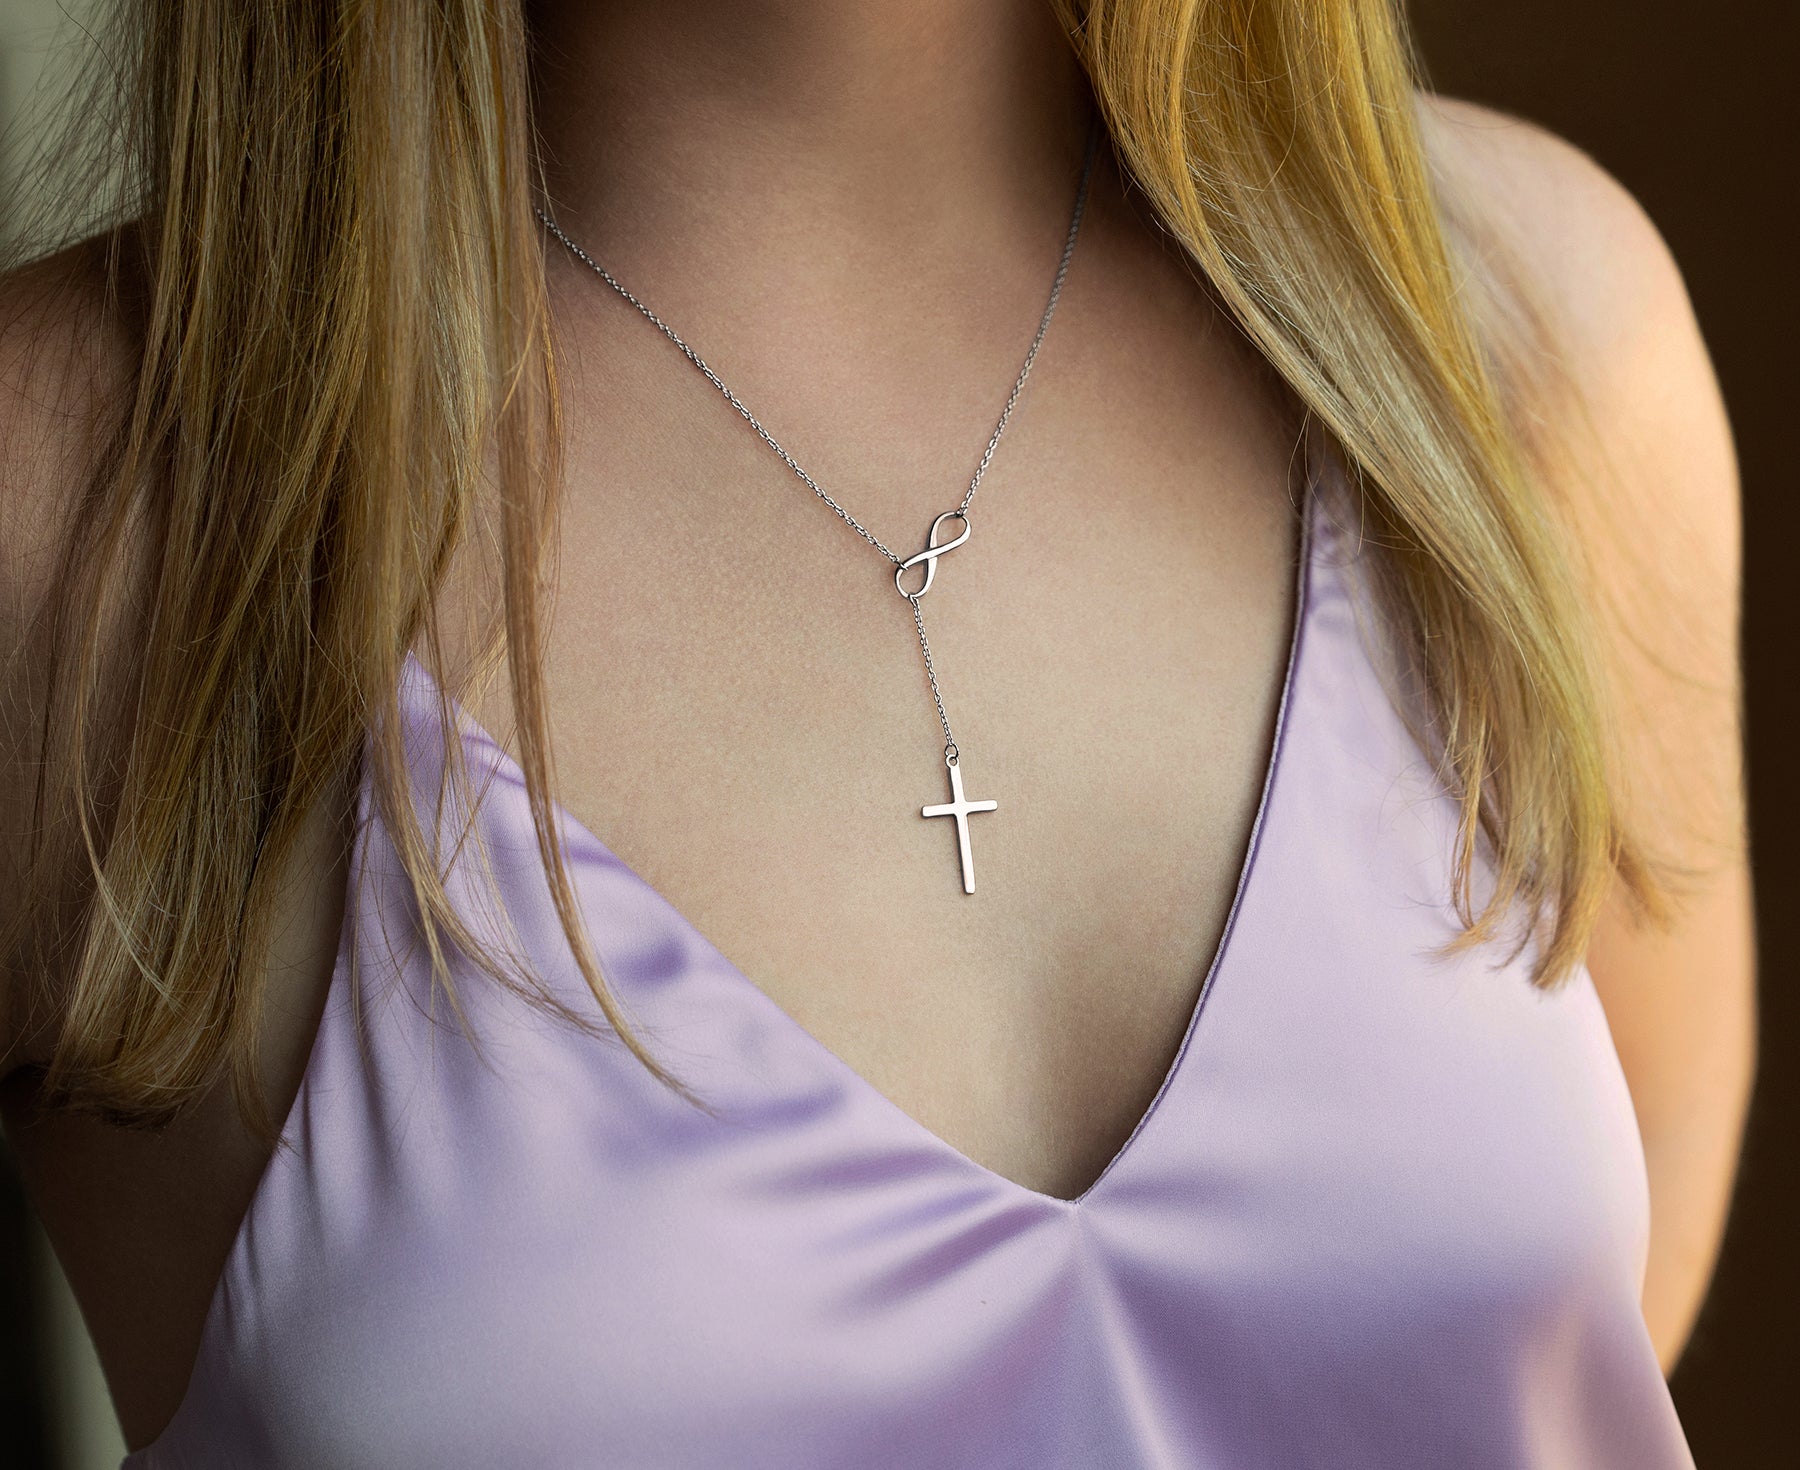 Silver Plated Infinity Cross Necklace Chain for Girls and Women